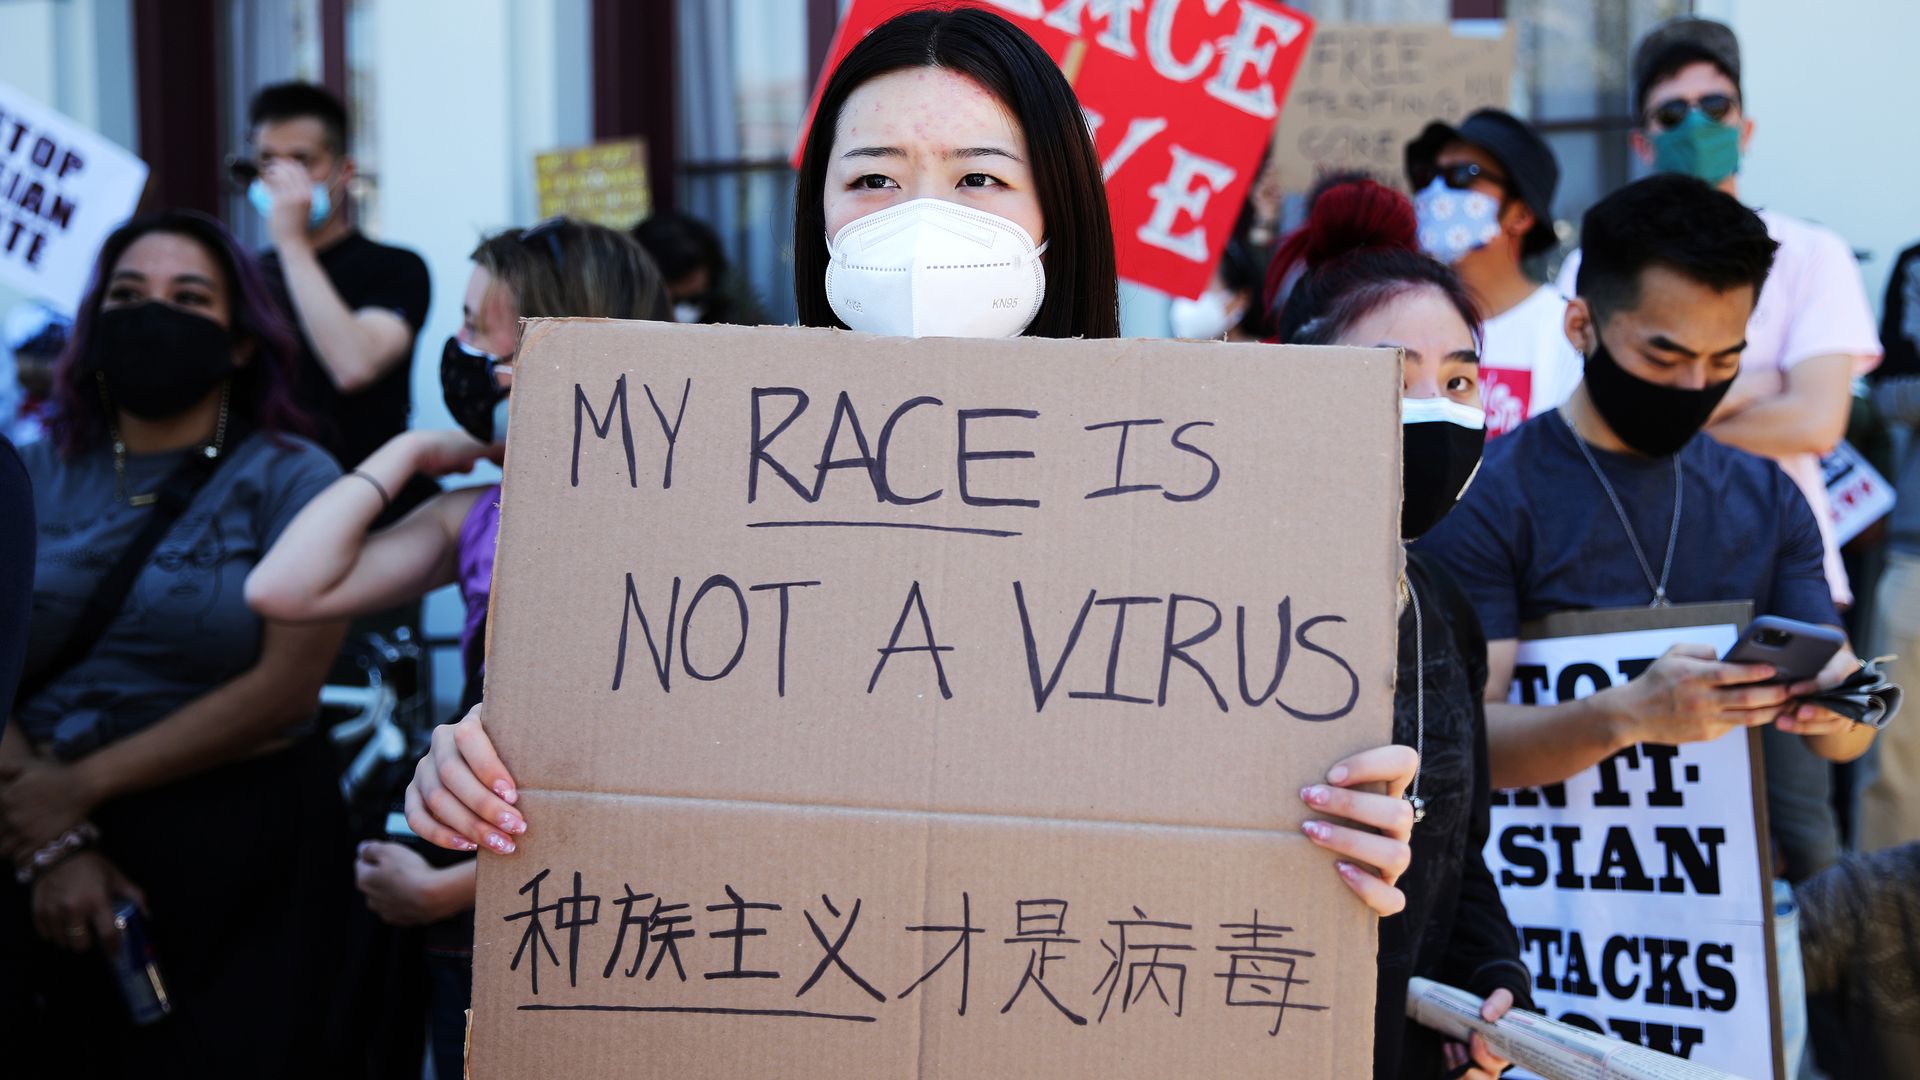 Photo of a masked Asian protester holding a cardboard sign that says "My race is not a virus" in English and Chinese